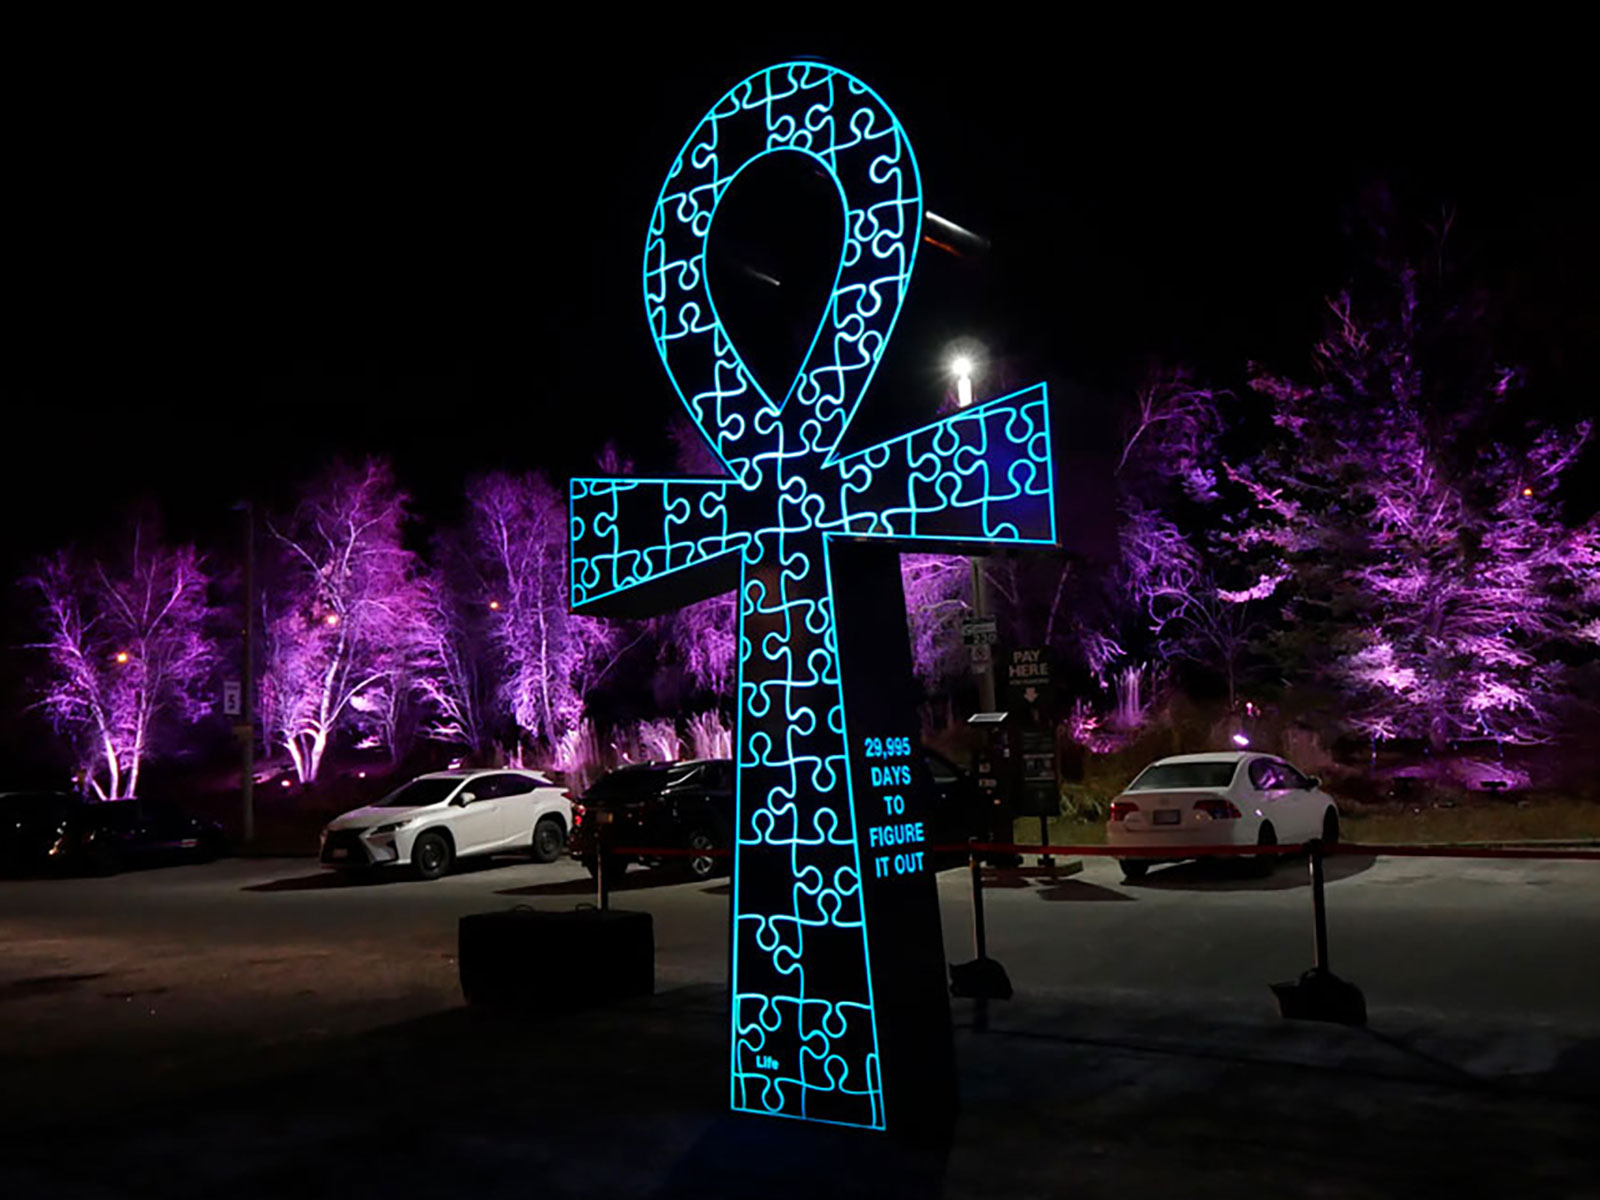 Life Puzzle (Ankh) - A 2019 Burning Man Art Project